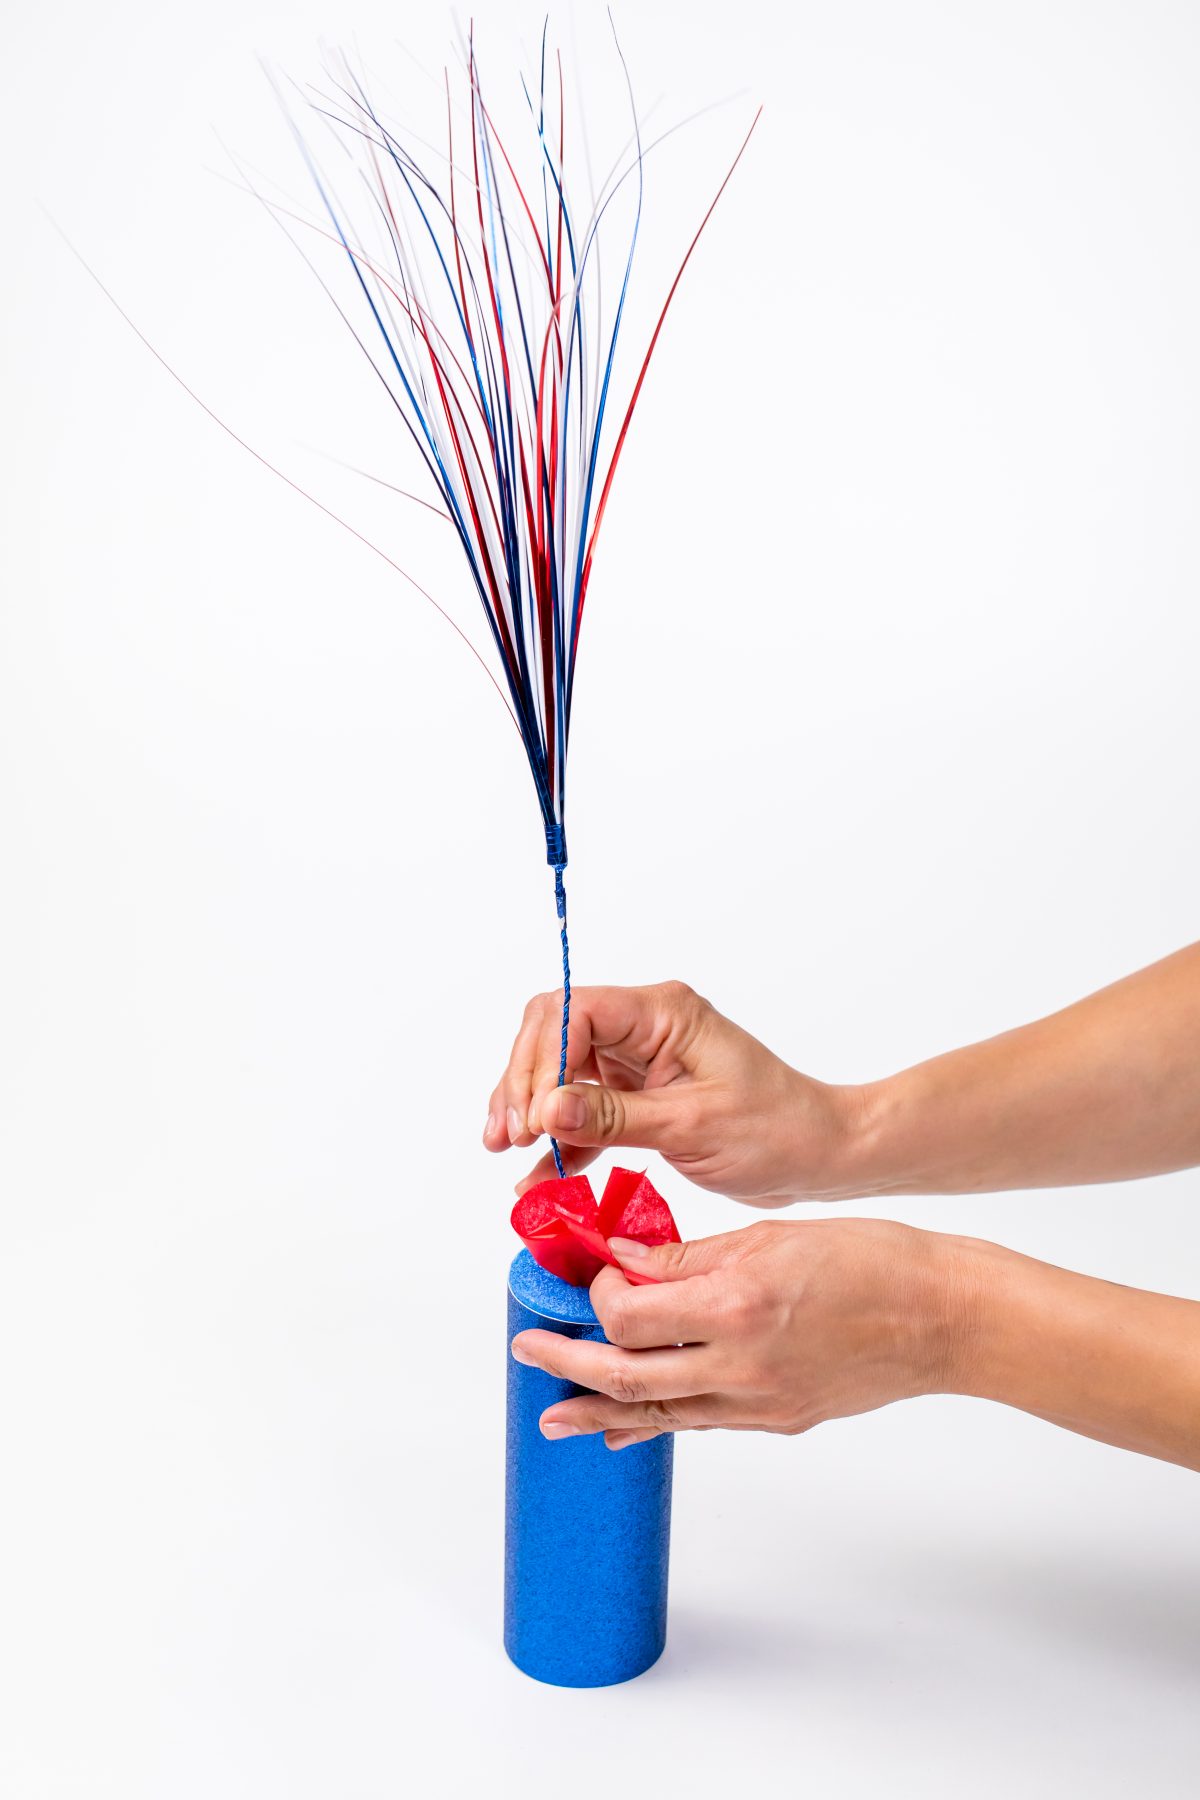 Stuff pool noodle with red white and blue streamer